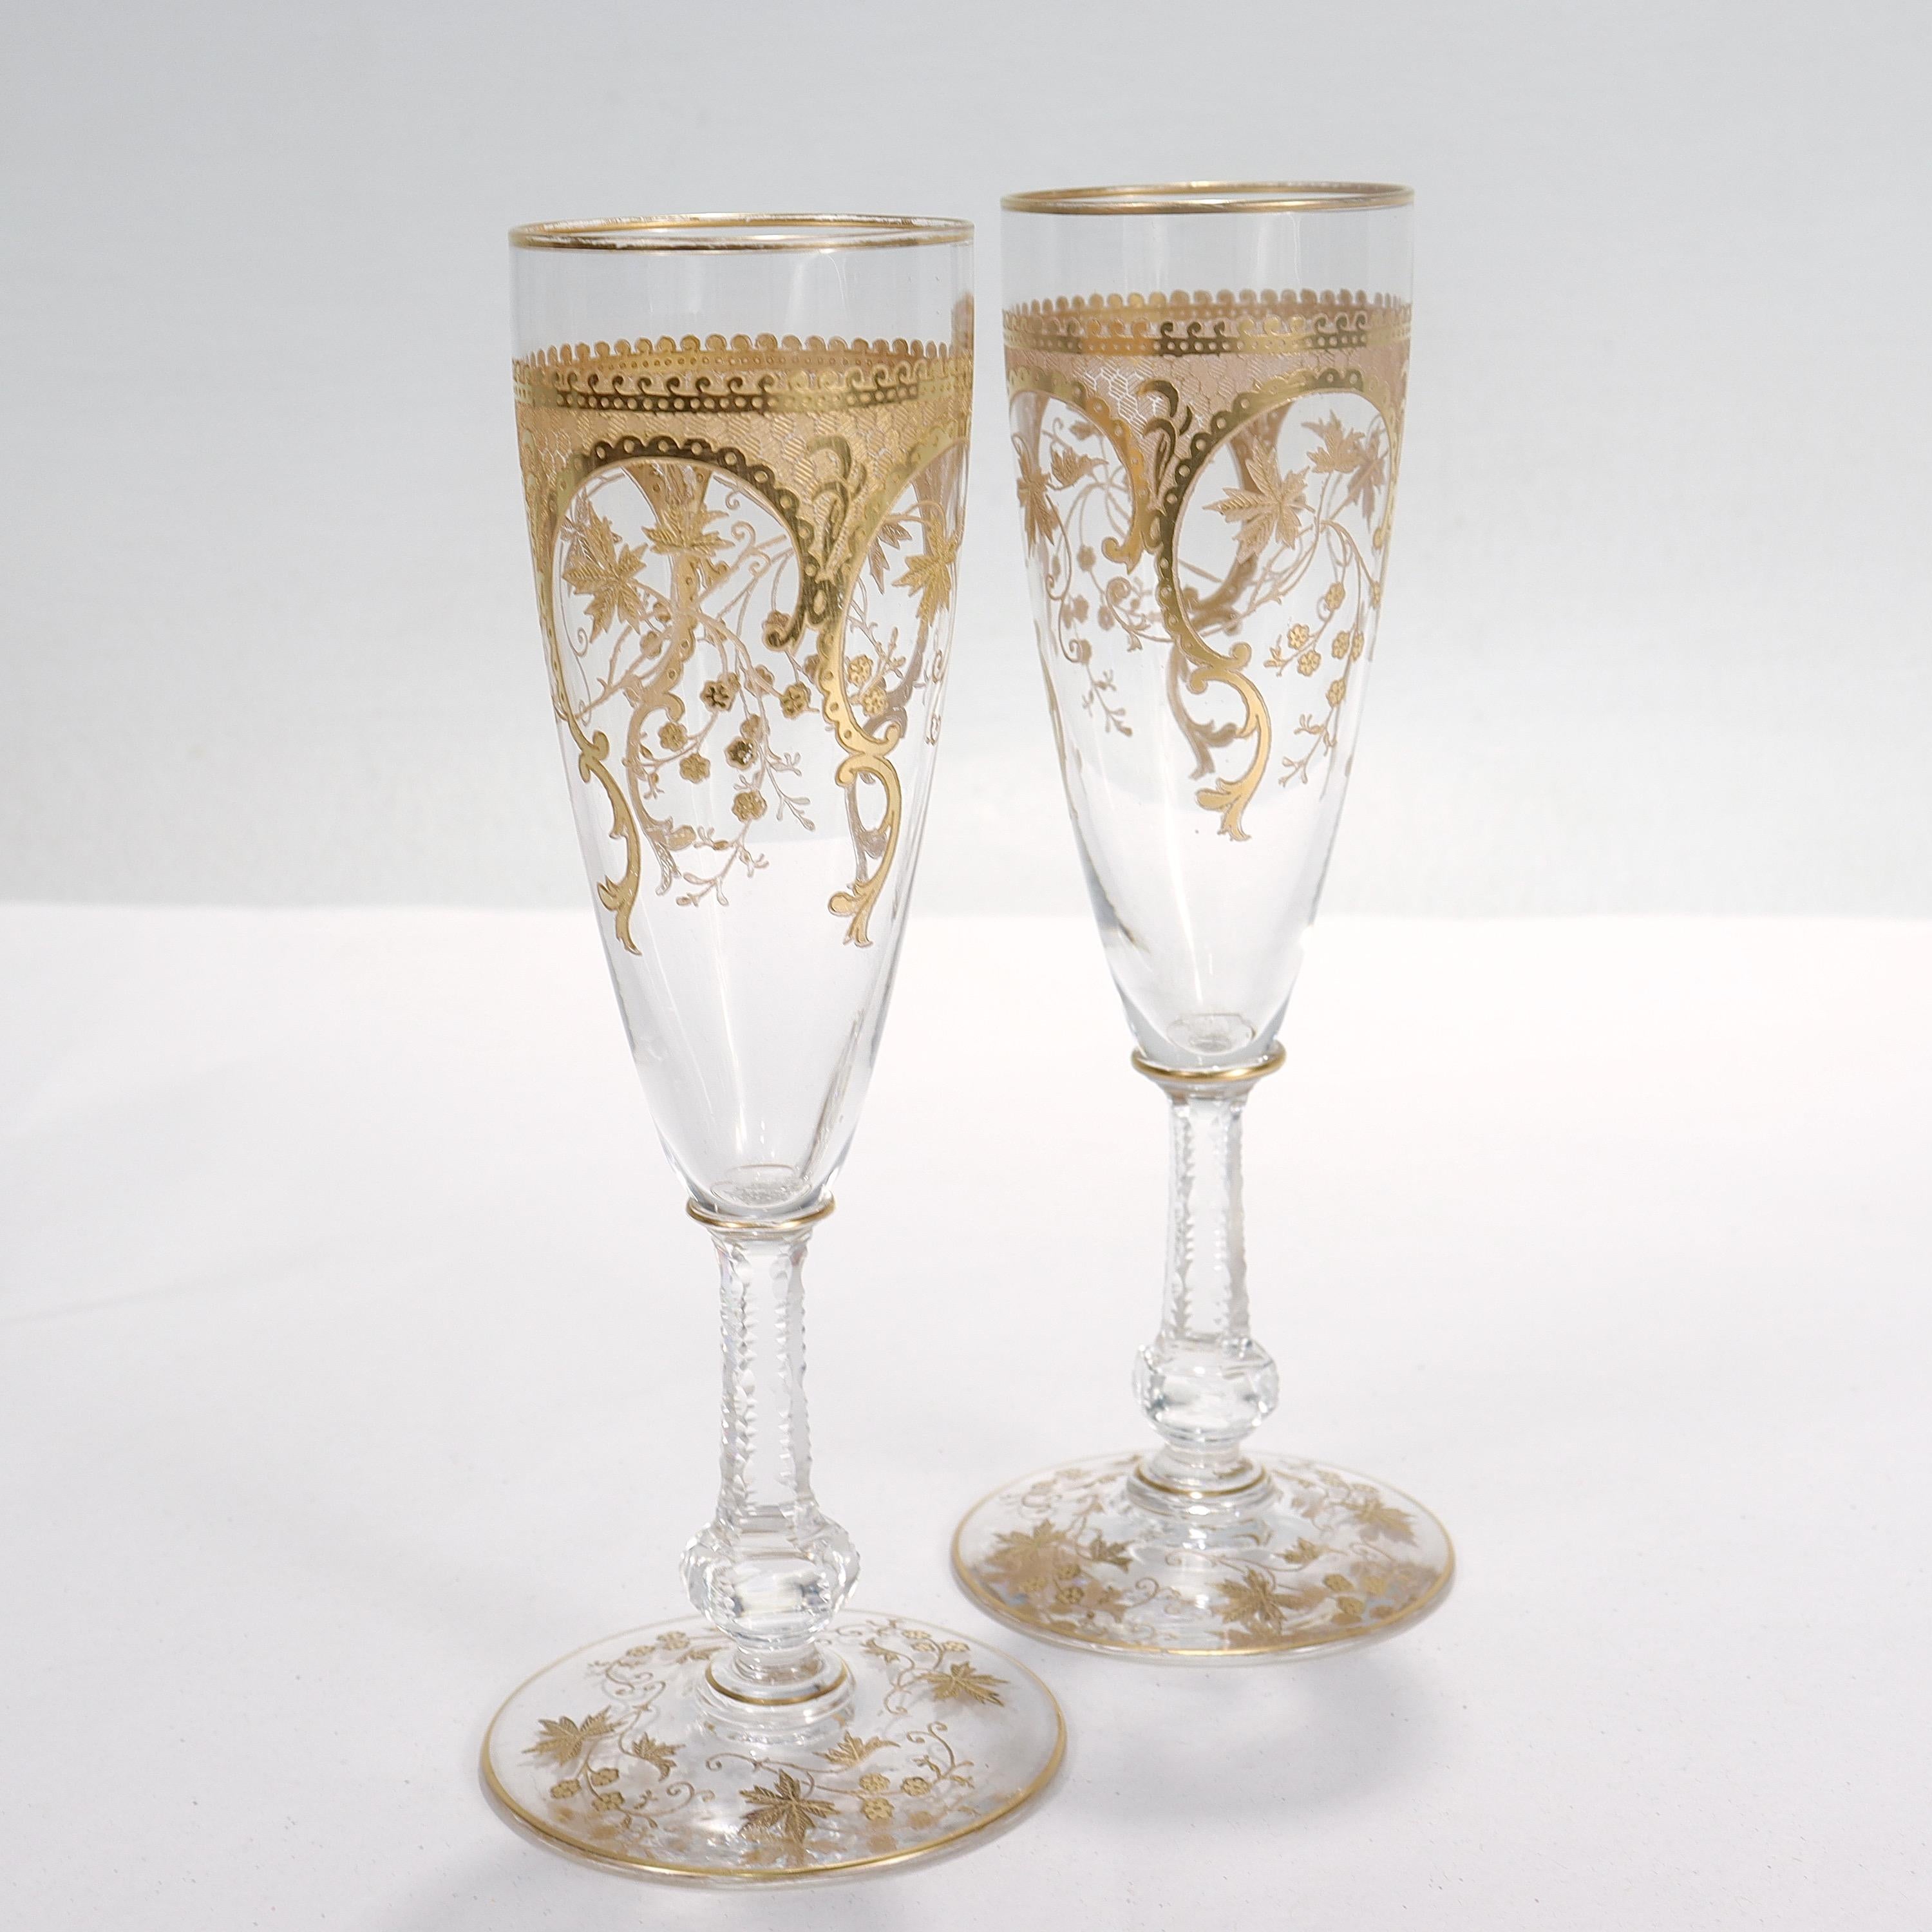 A pair of very fine old or antique champagne stems or flutes.

In molded and cut glass with finely etched & richly gilt flower & vine trellis fretwork designs throughout.

(In the Baccarat or Saint Louis Style).

Perfect for the special